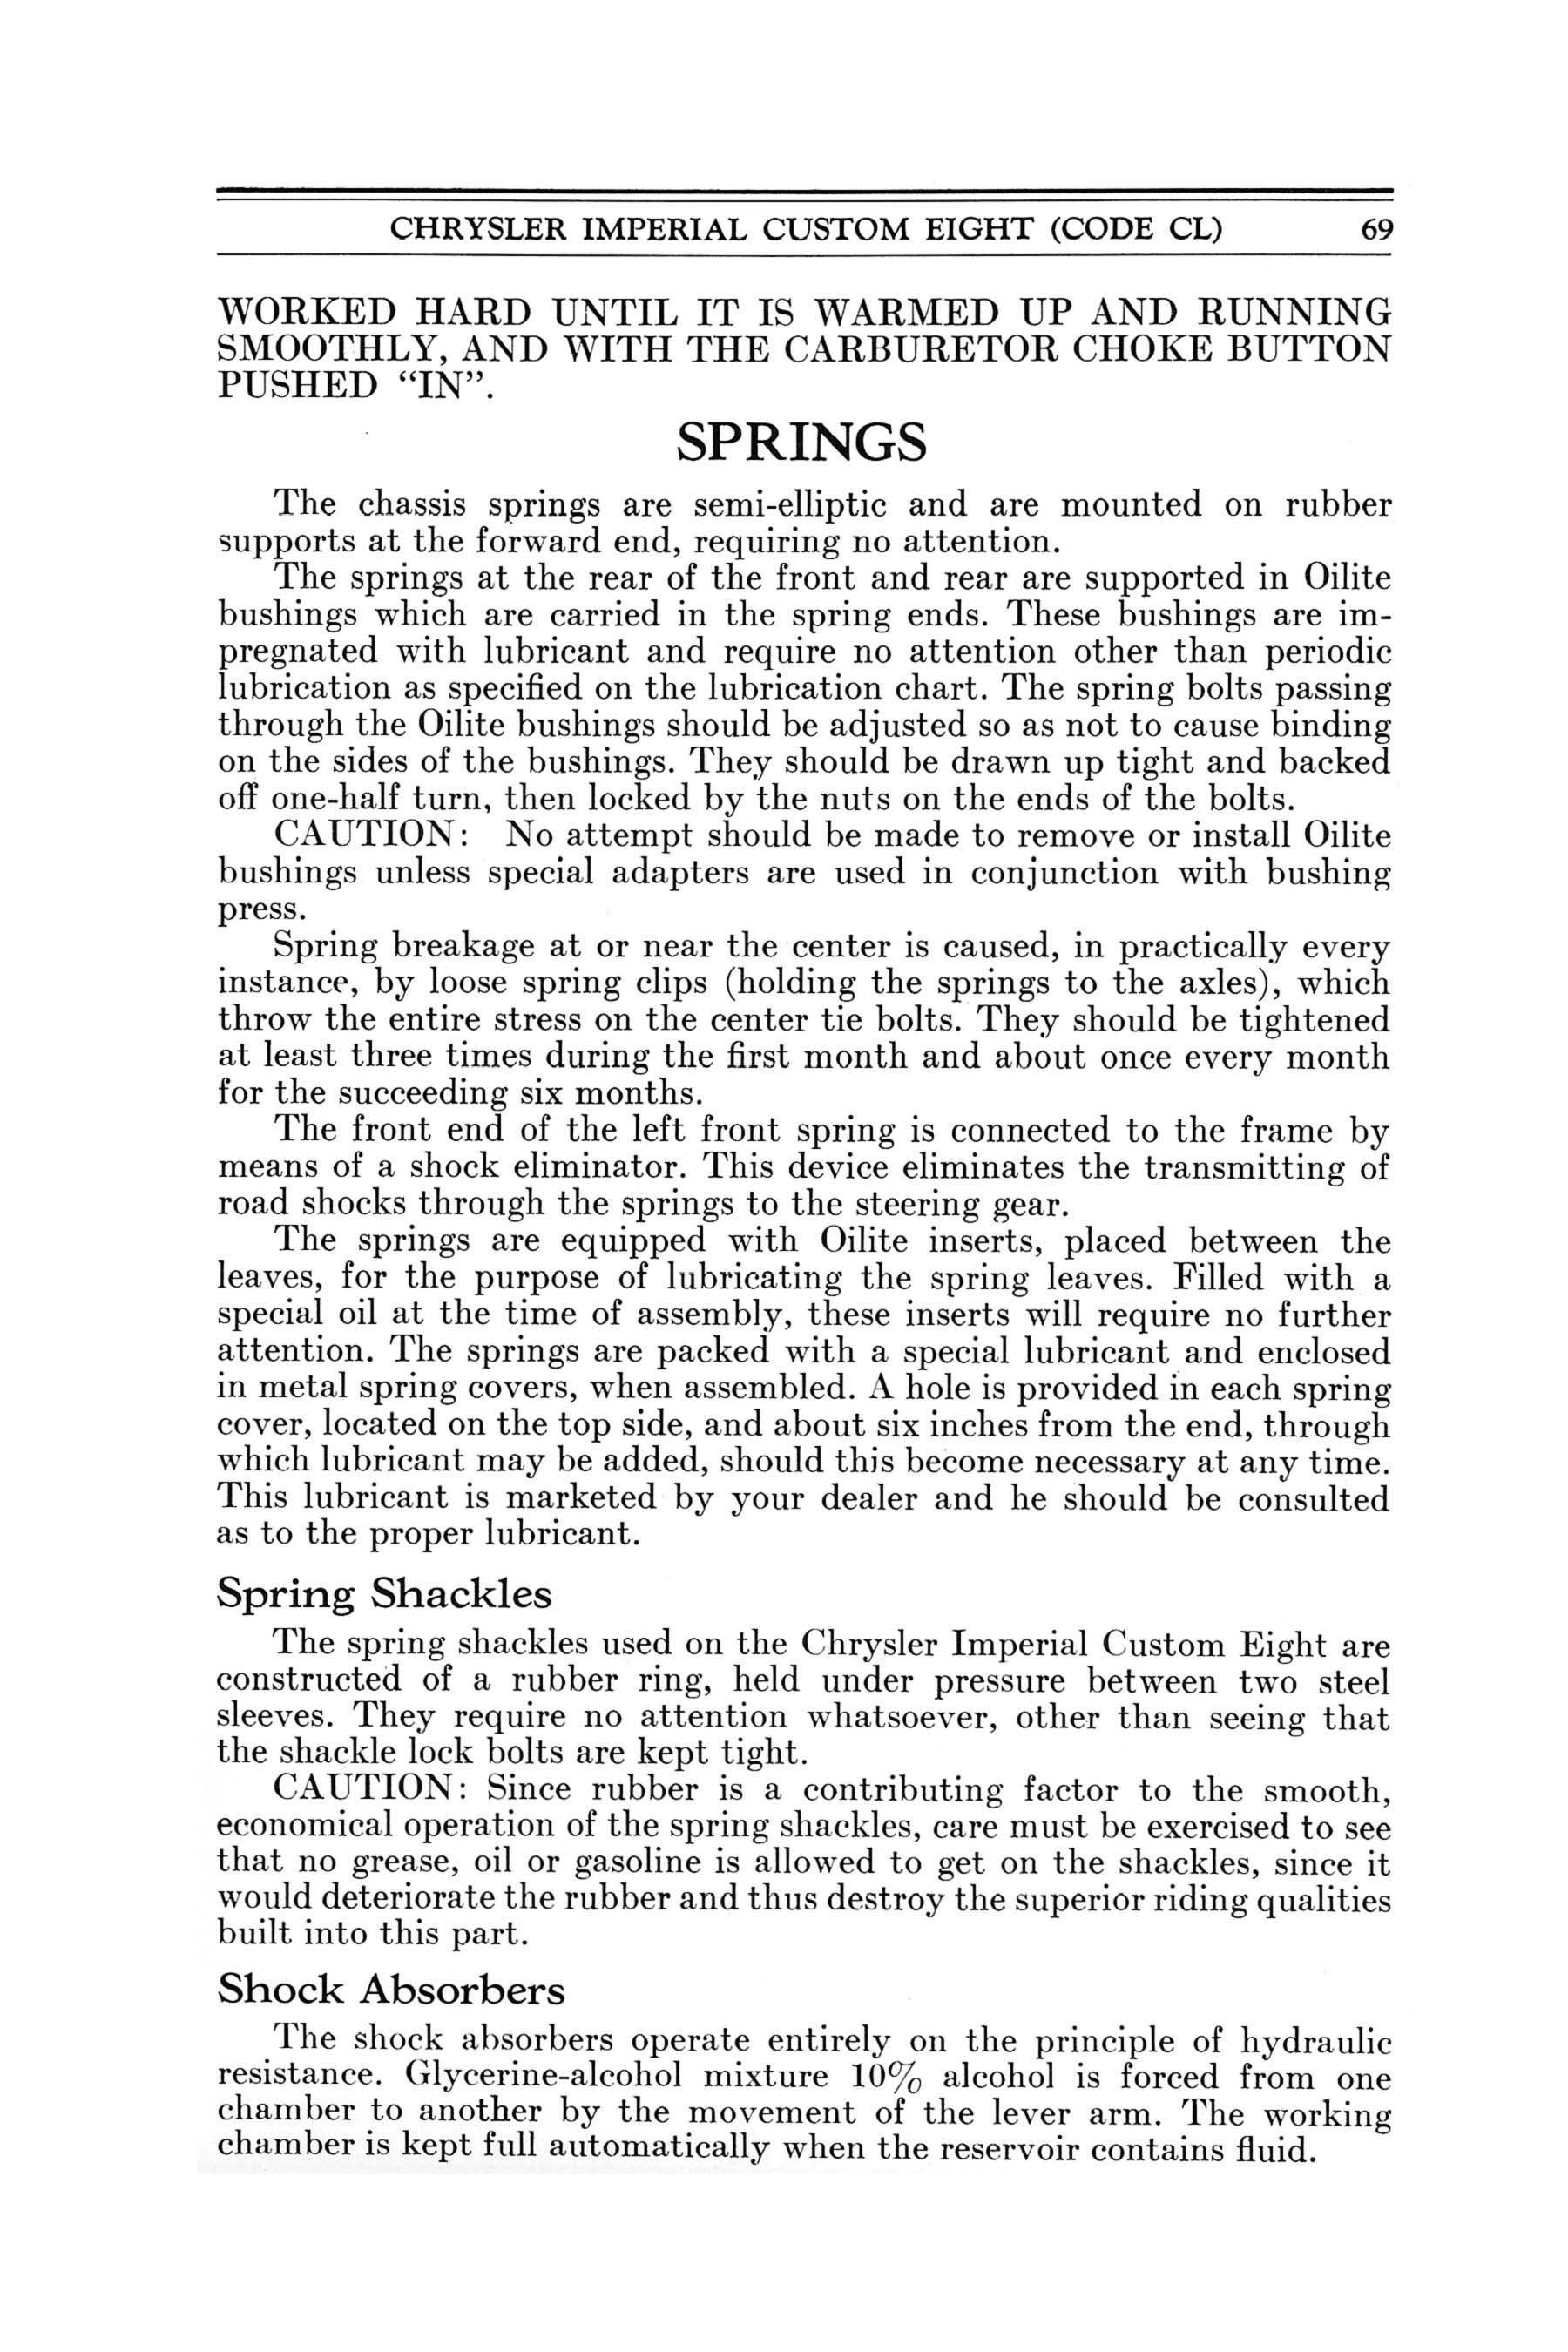 1932 Chrysler Imperial Instruction Book Page 92